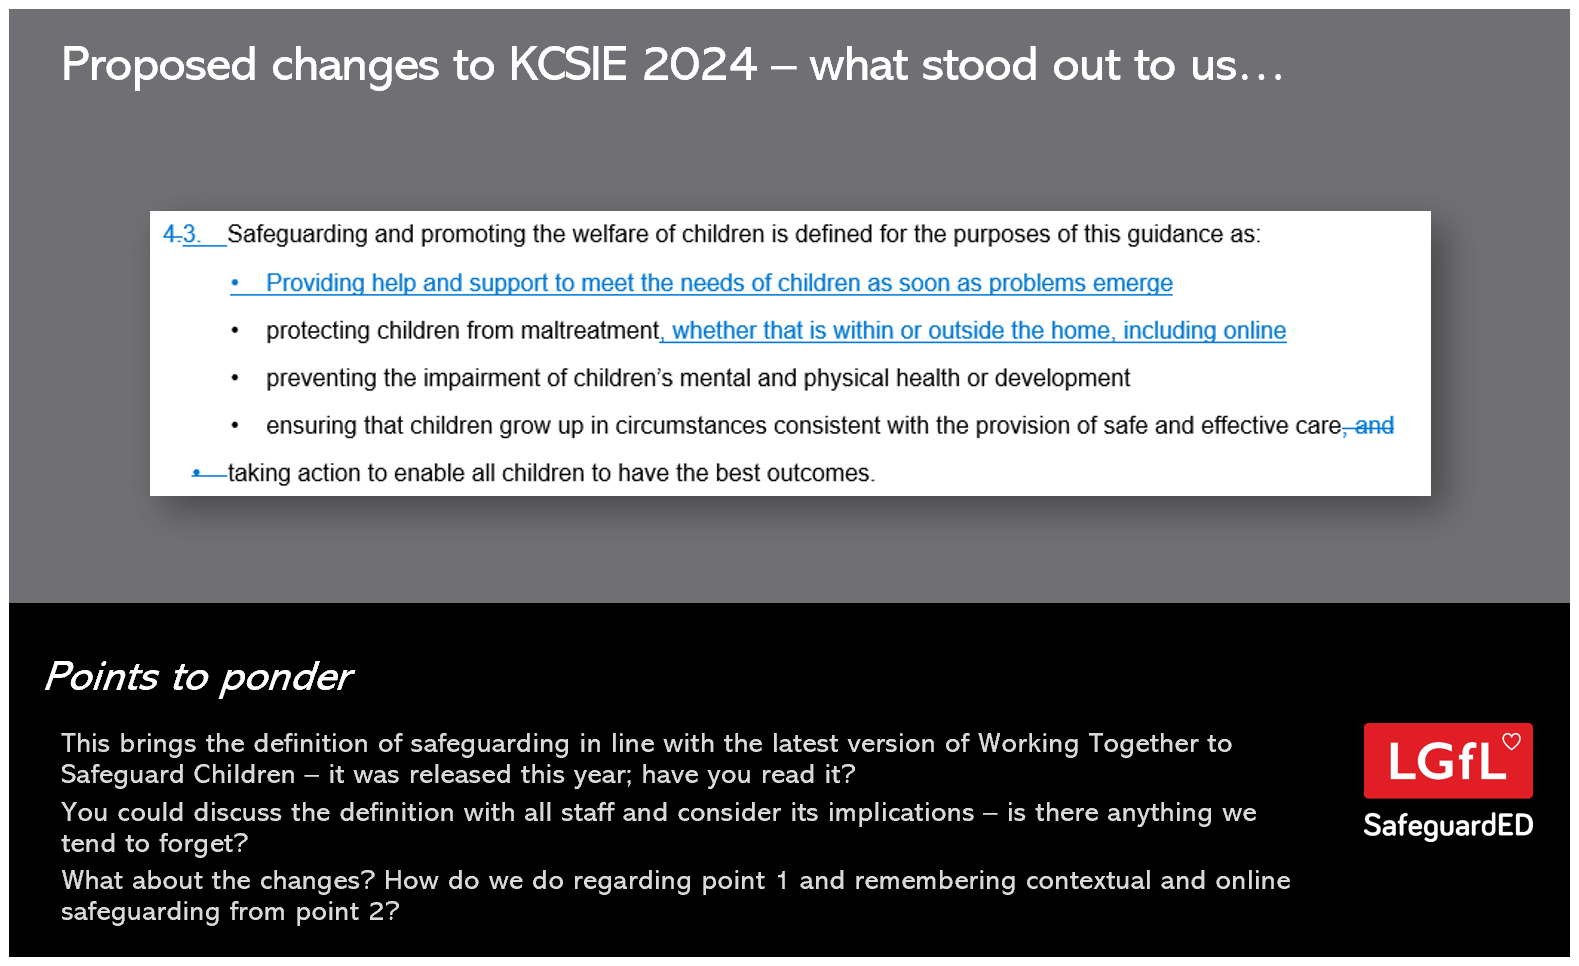 slide detailing one proposed change to KCSIE 2024